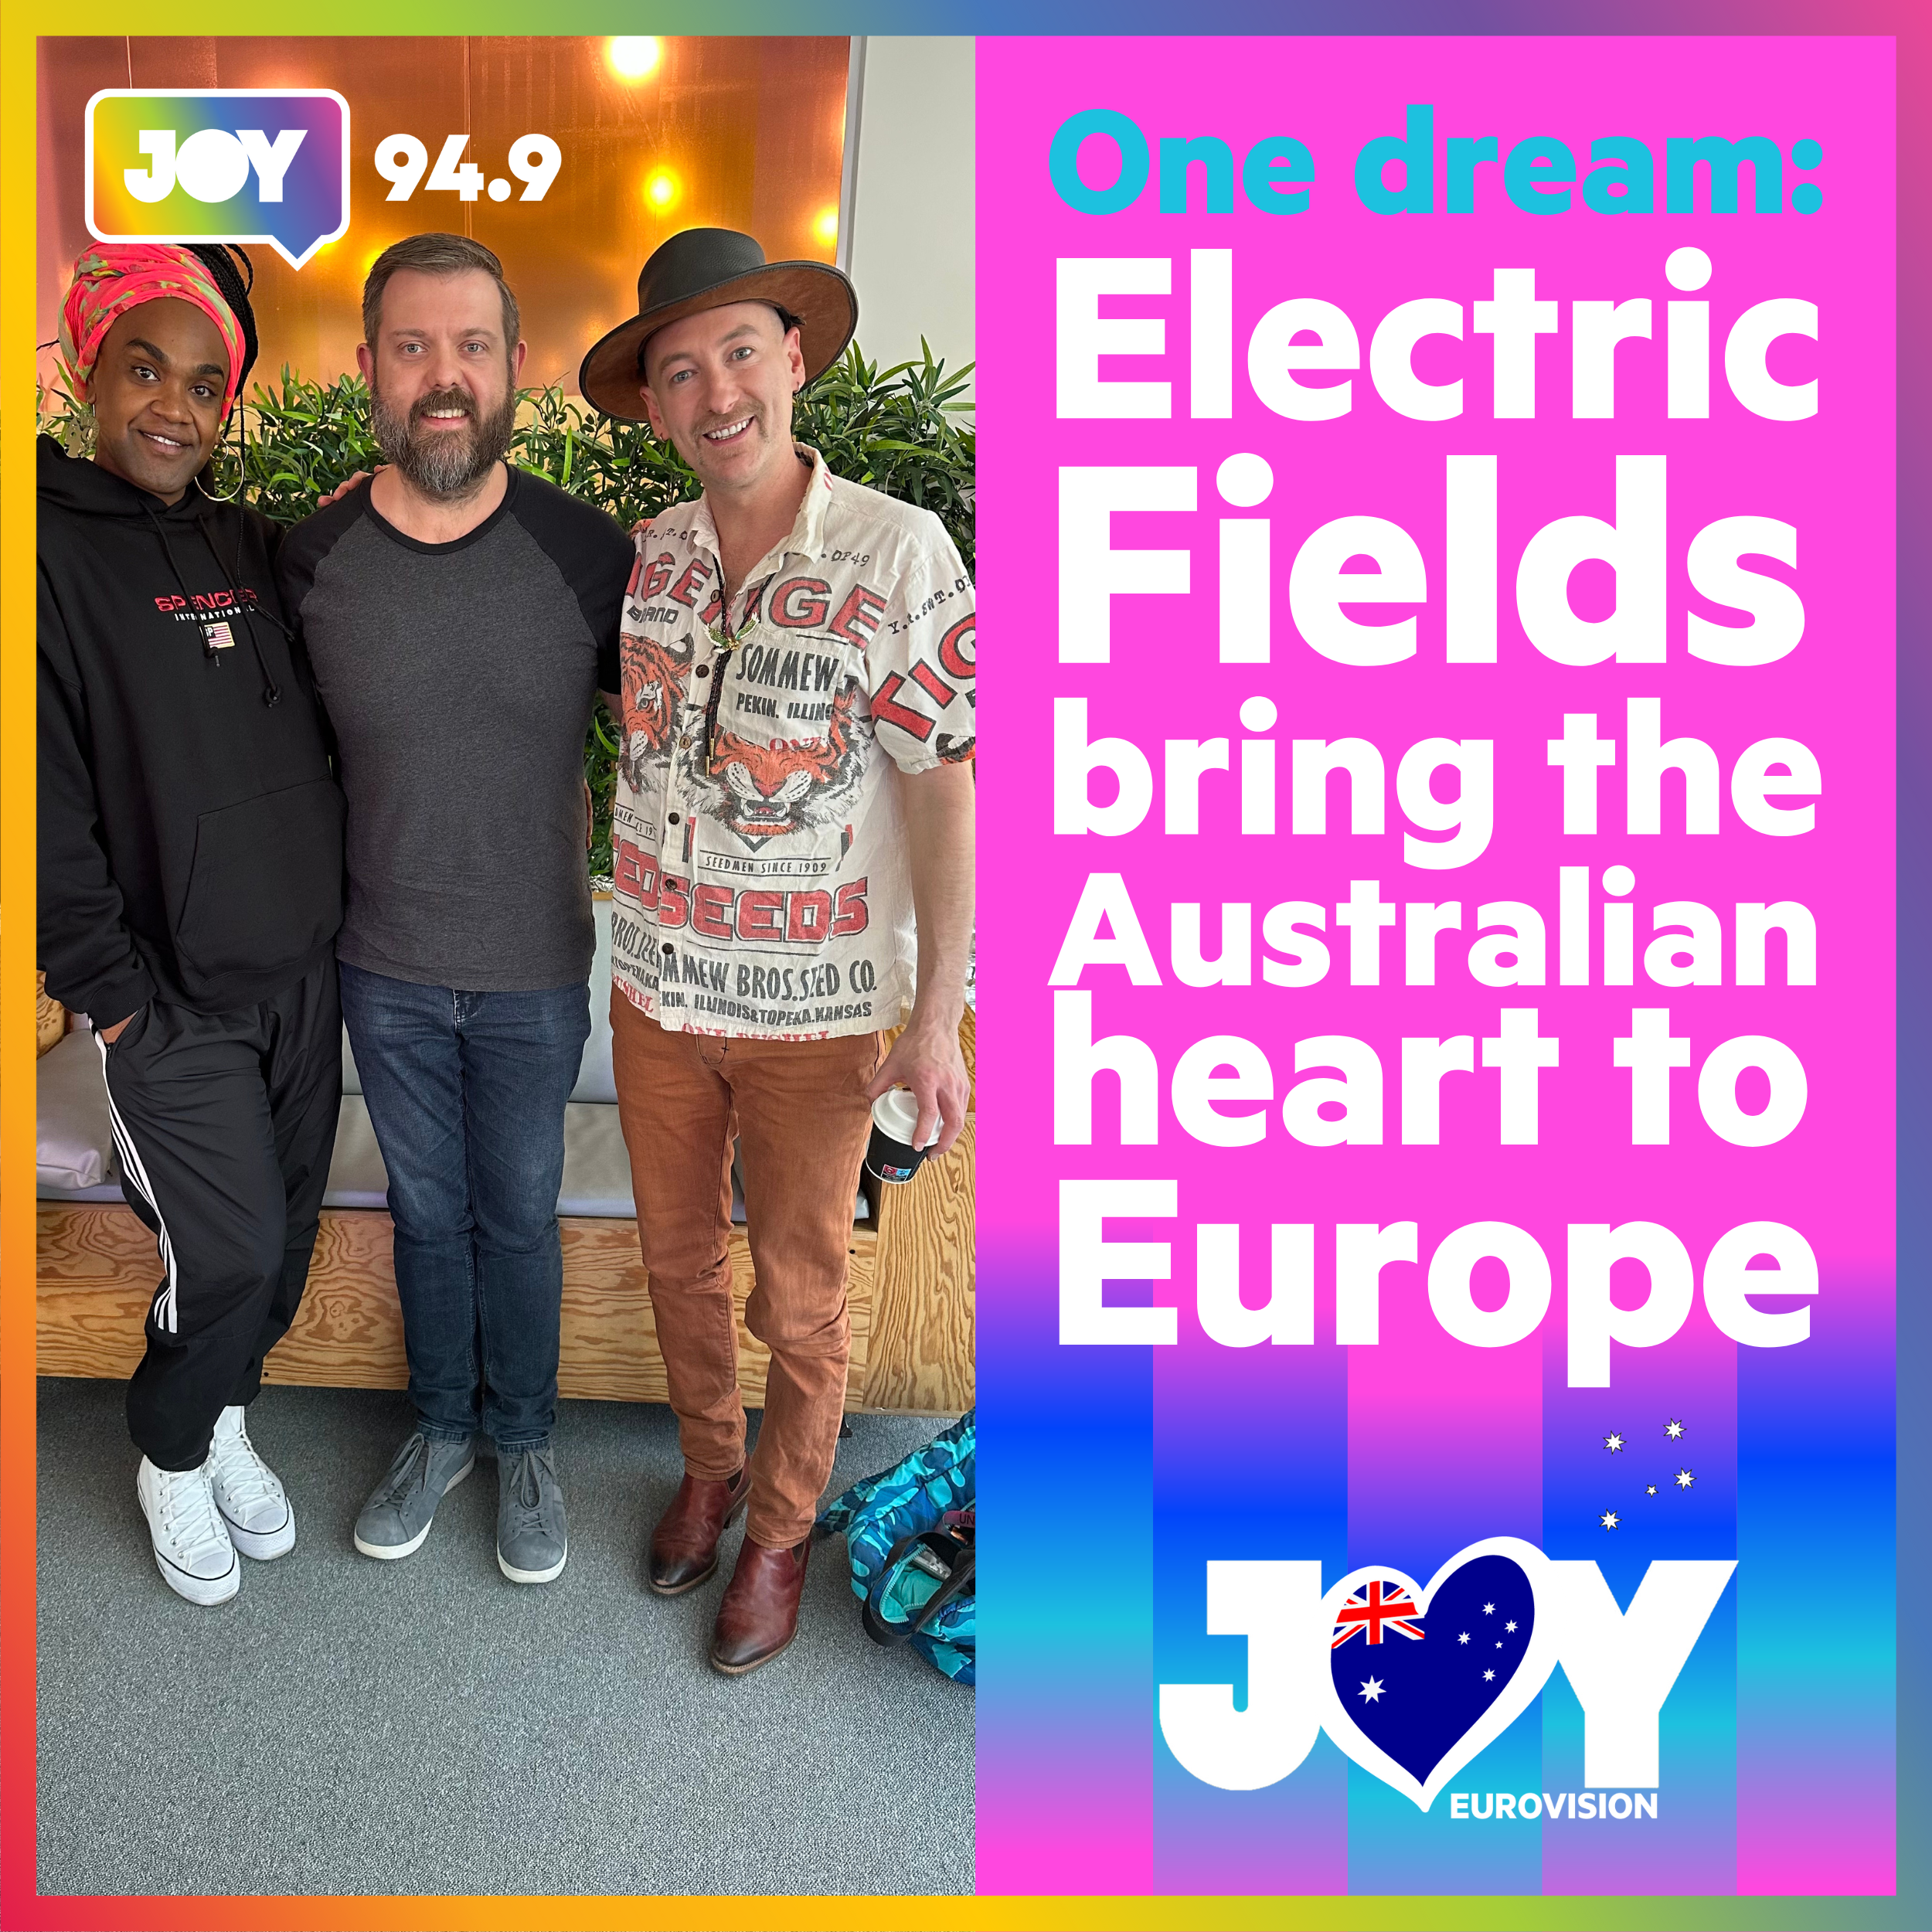 🇦🇺 One dream: Electric Fields bring the Australian heart to Europe